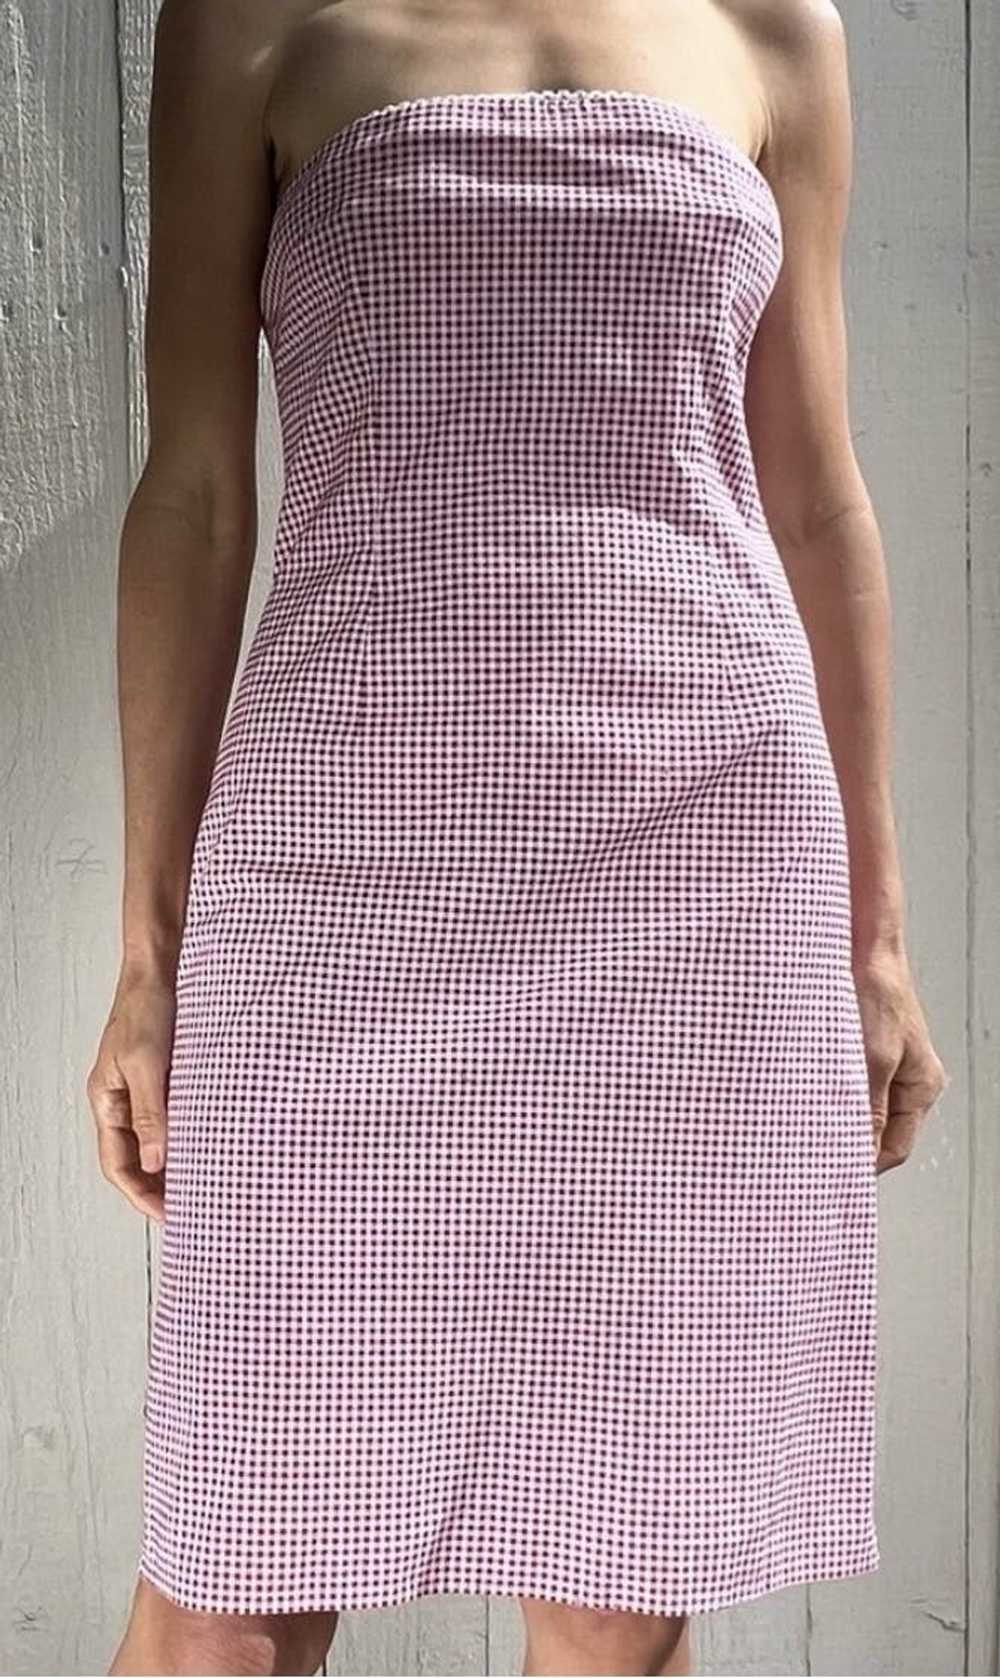 Other FRENCH CURVE CLOTHING Checkered Pattern Str… - image 2